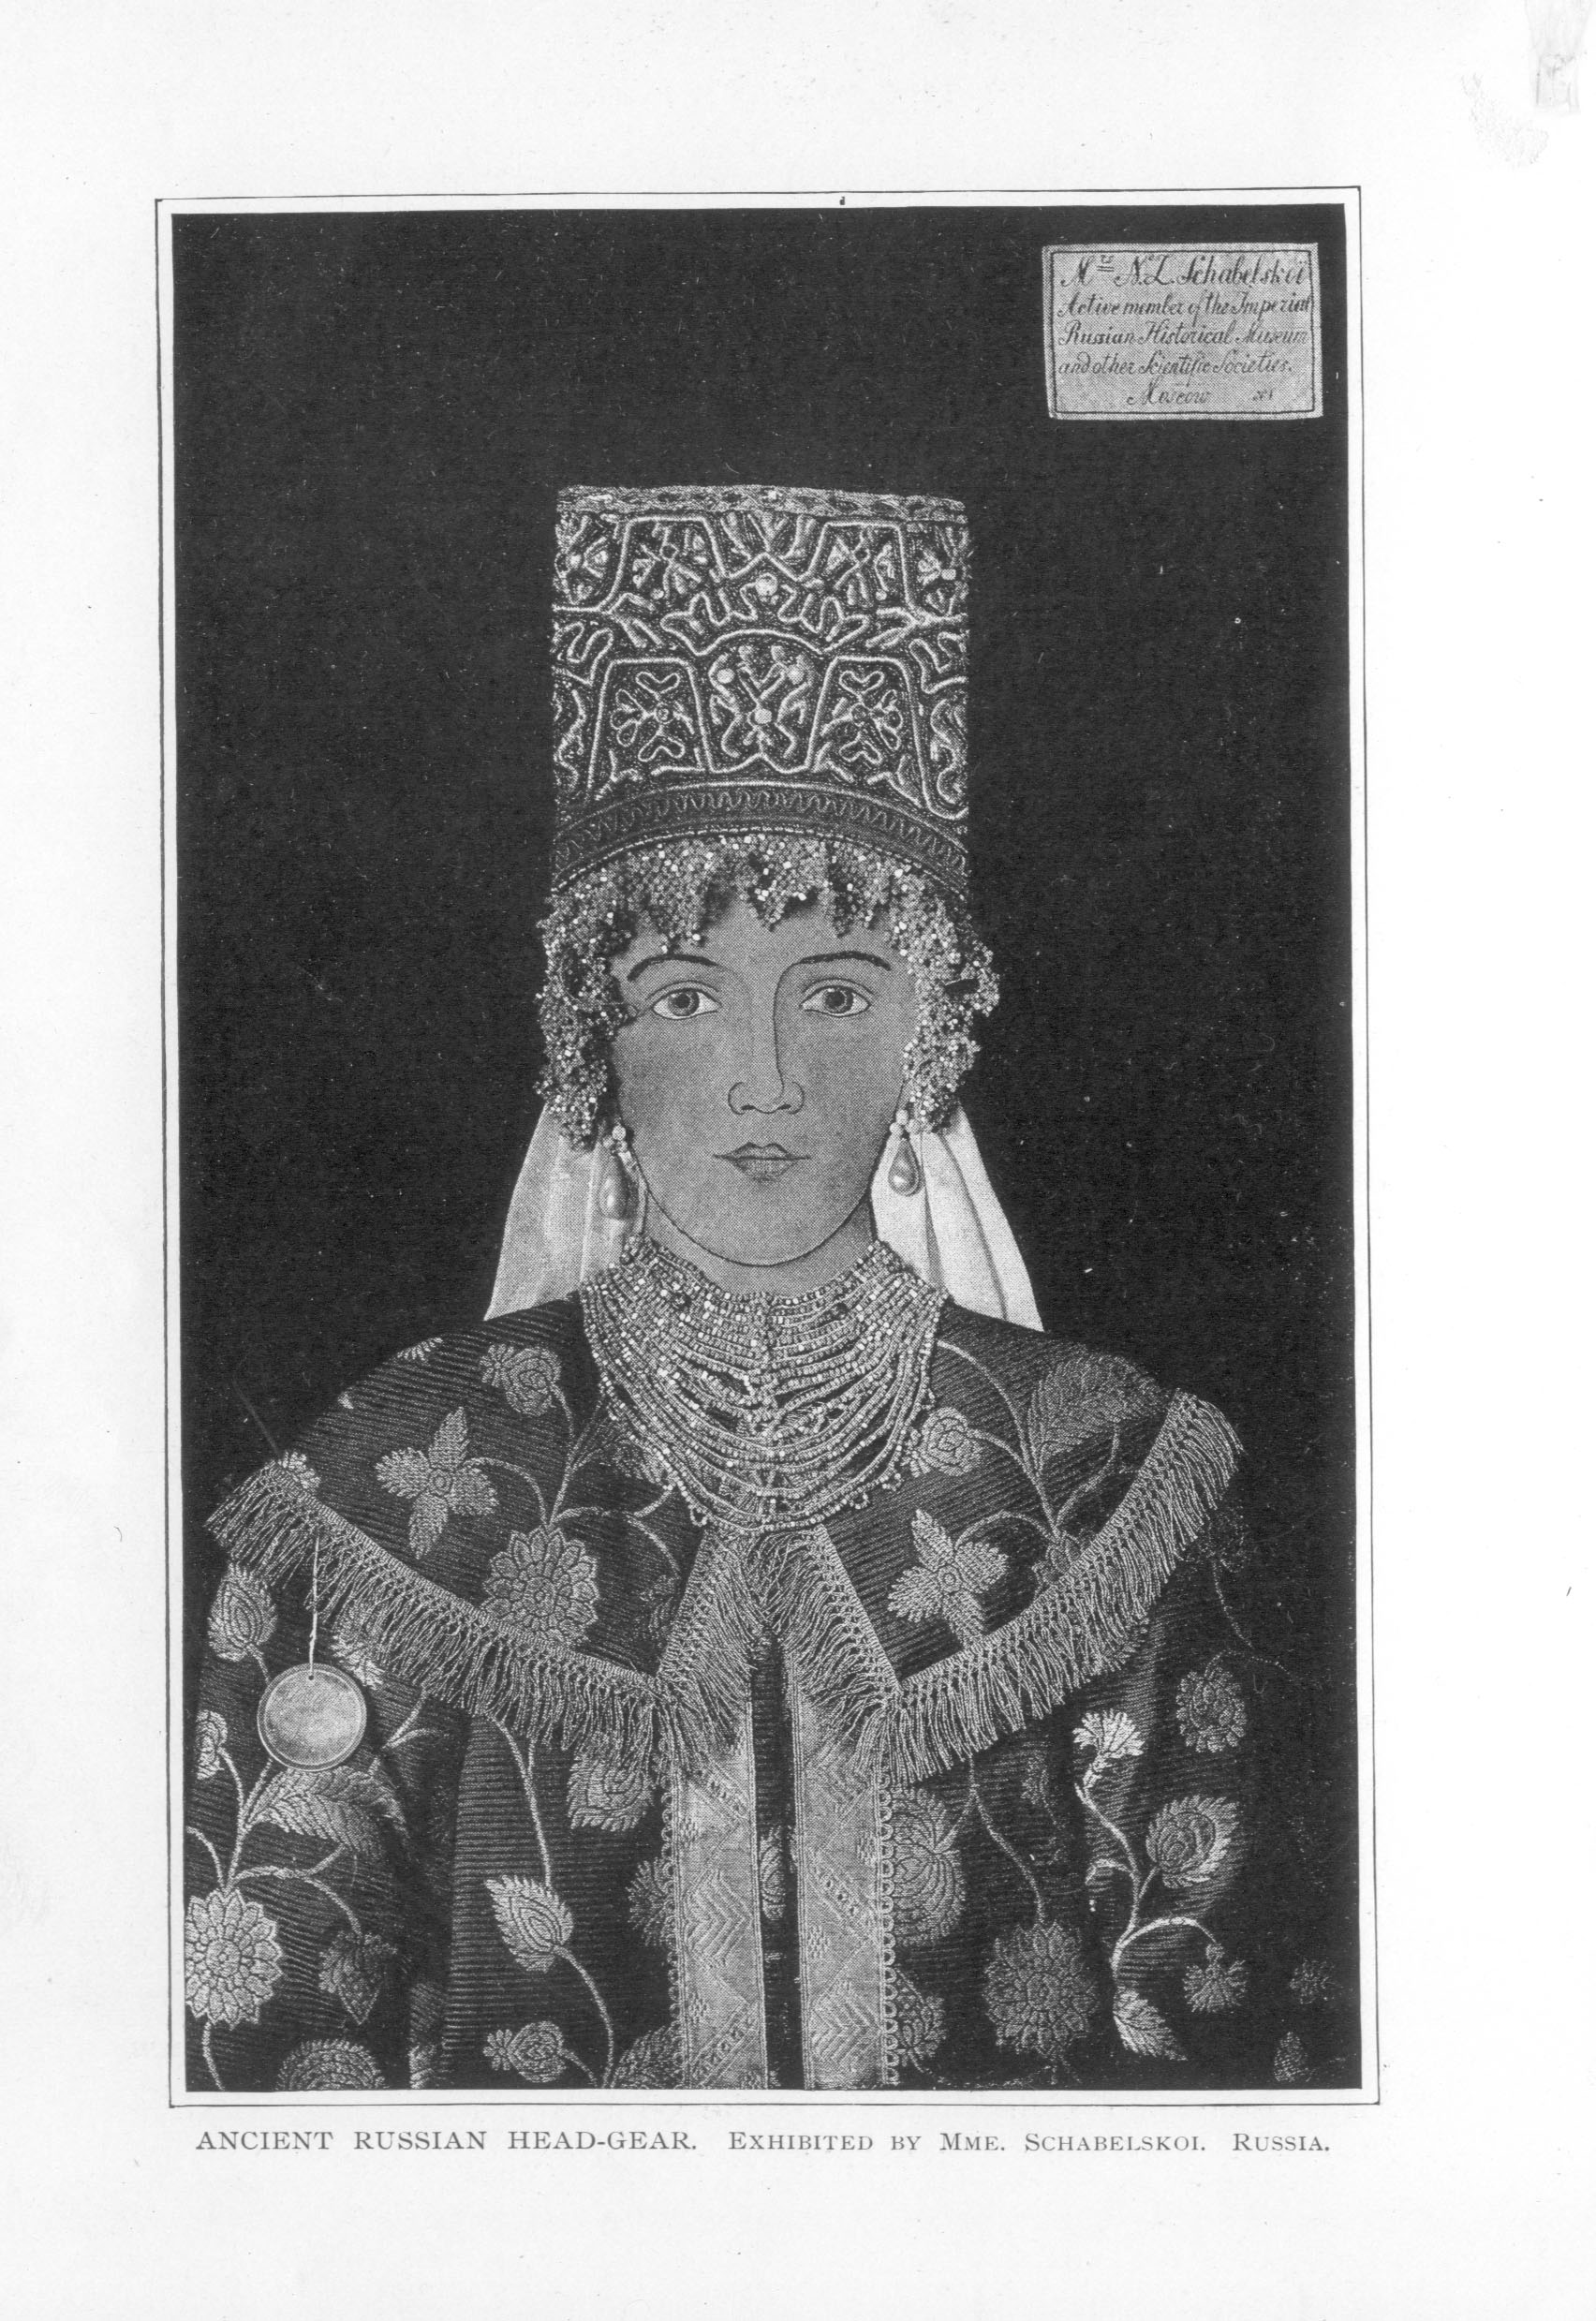 rectangular embroidered headdress with jeweled beadwork decorating rim on display with floral robe